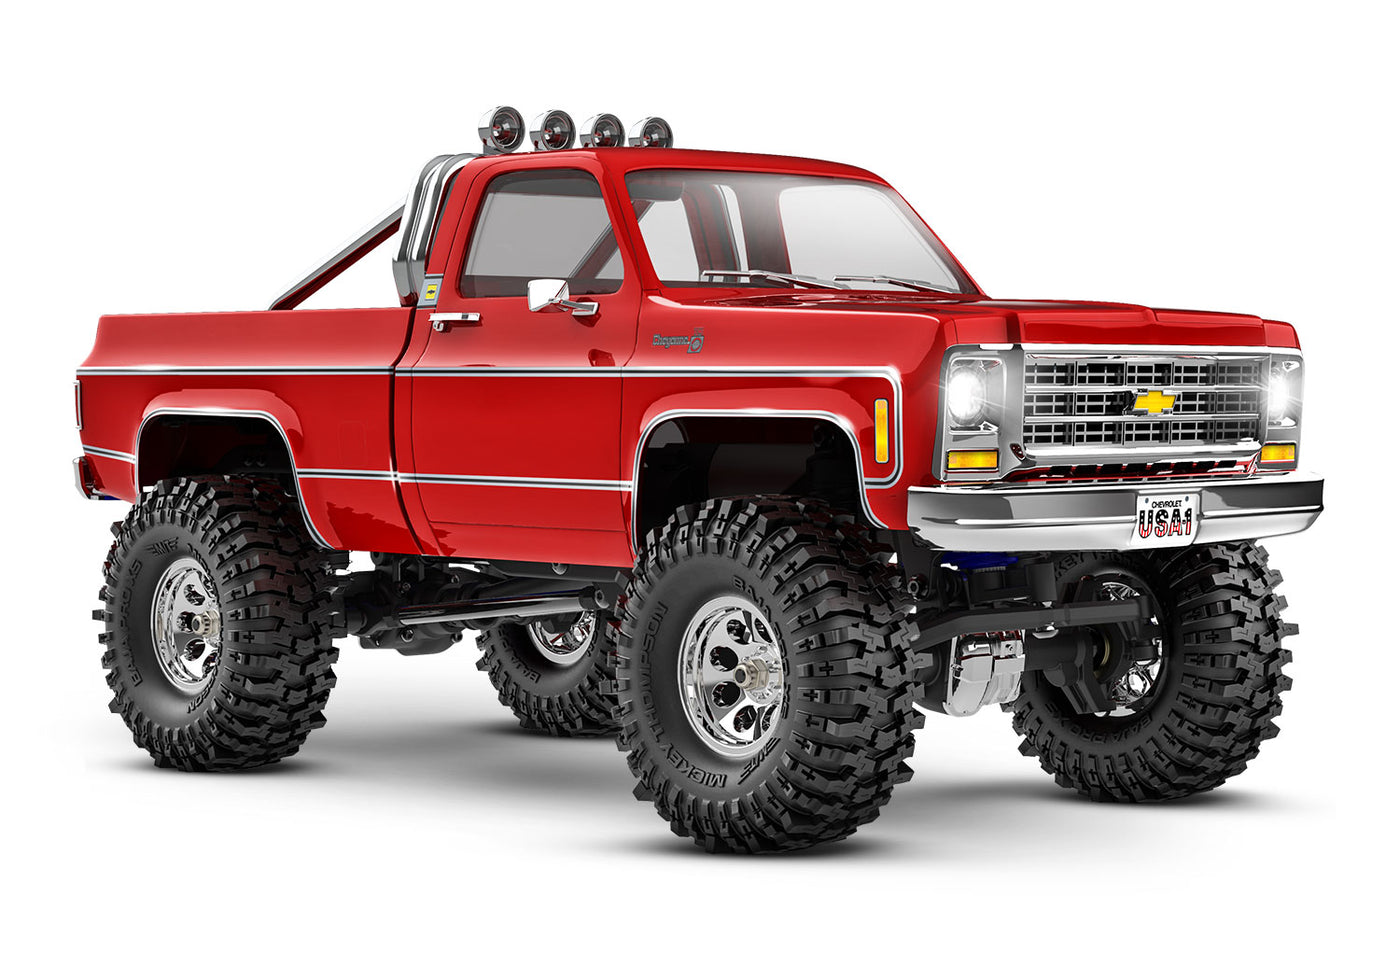 TRX-4M™ Chevrolet® K10 High Trail™ Traxxas #97064-1 In-store pick-up only